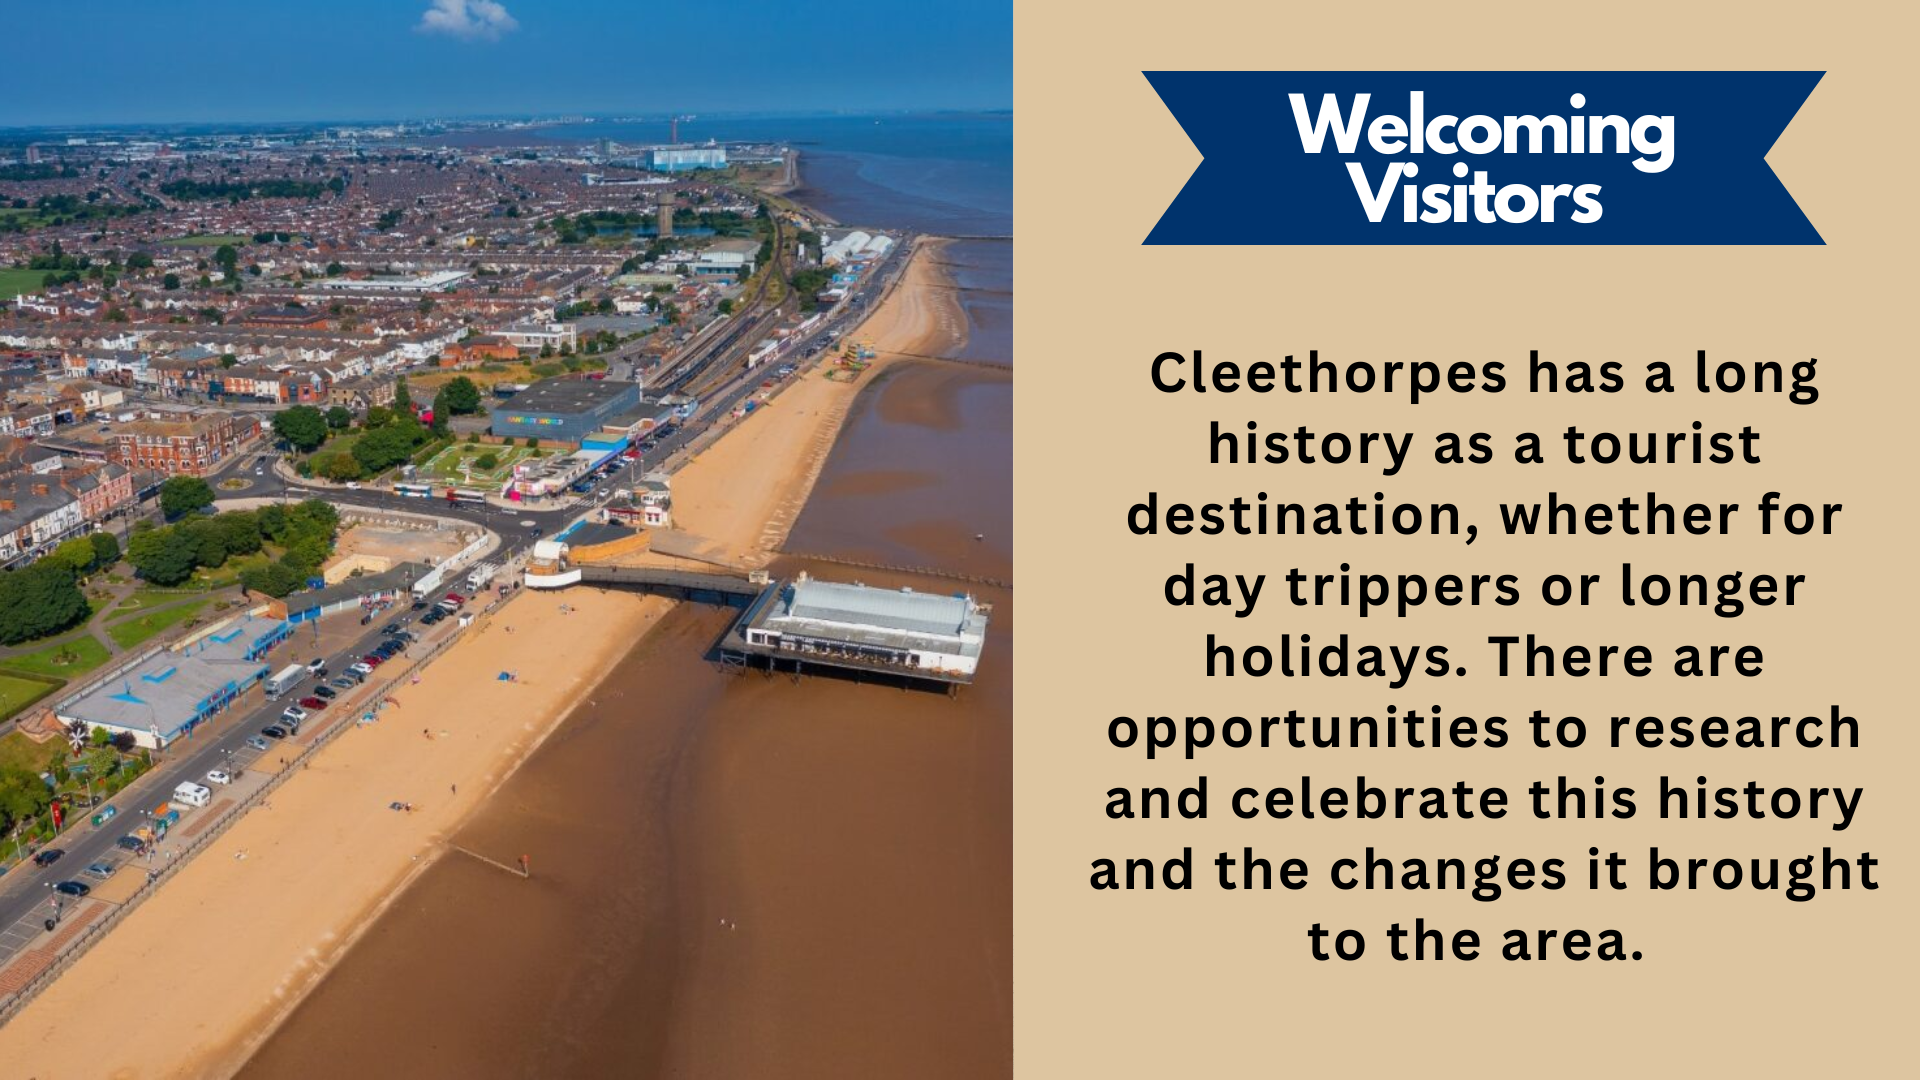 Welcoming Visitors . Cleethorpes has a long history as a tourist destination, whether for day trippers or longer holidays. There are opportunities to research and celebrate this history and the changes it brought to the area.